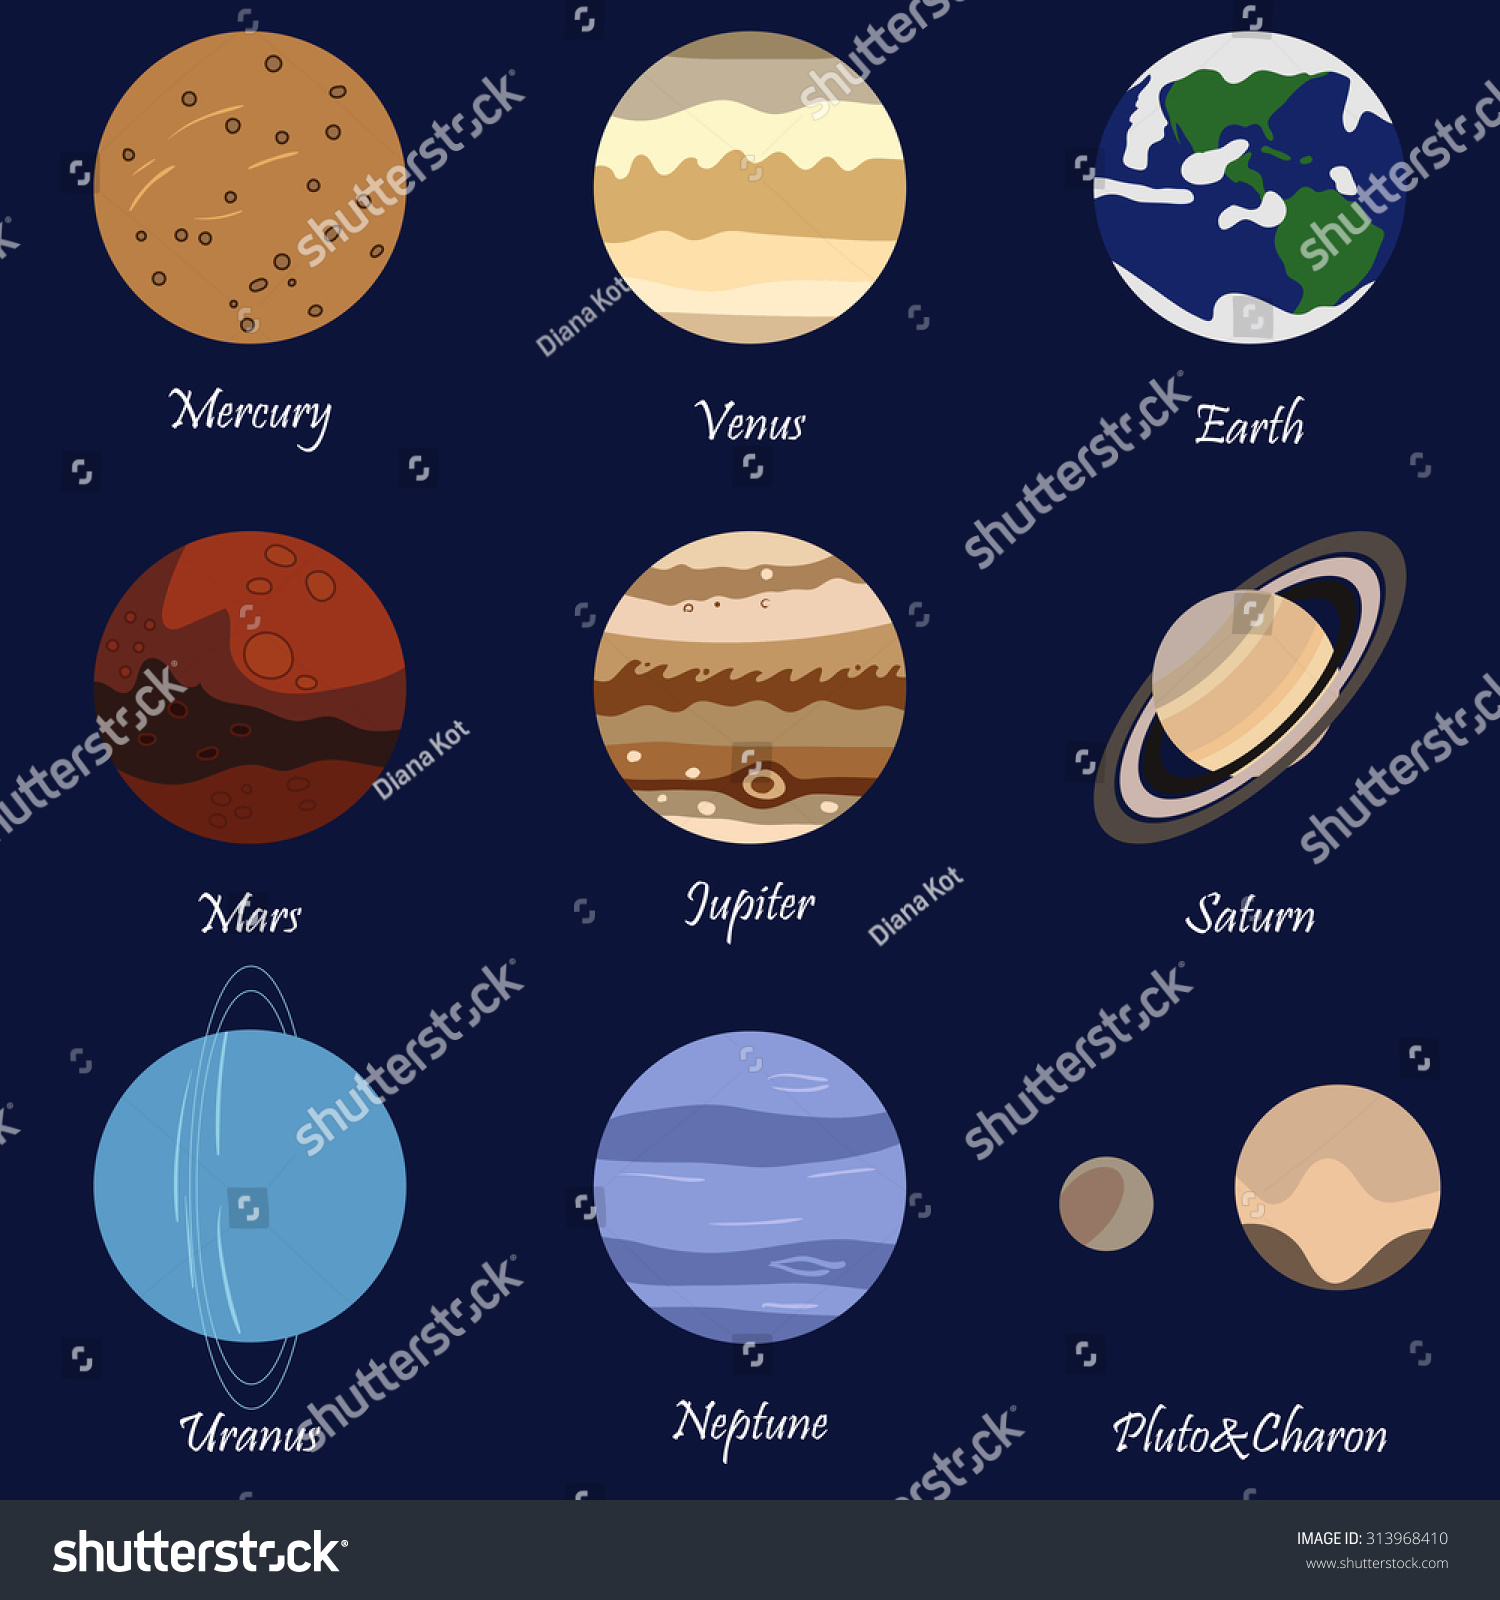 Vector Illustration Of Solar System And Planets - 313968410 : Shutterstock